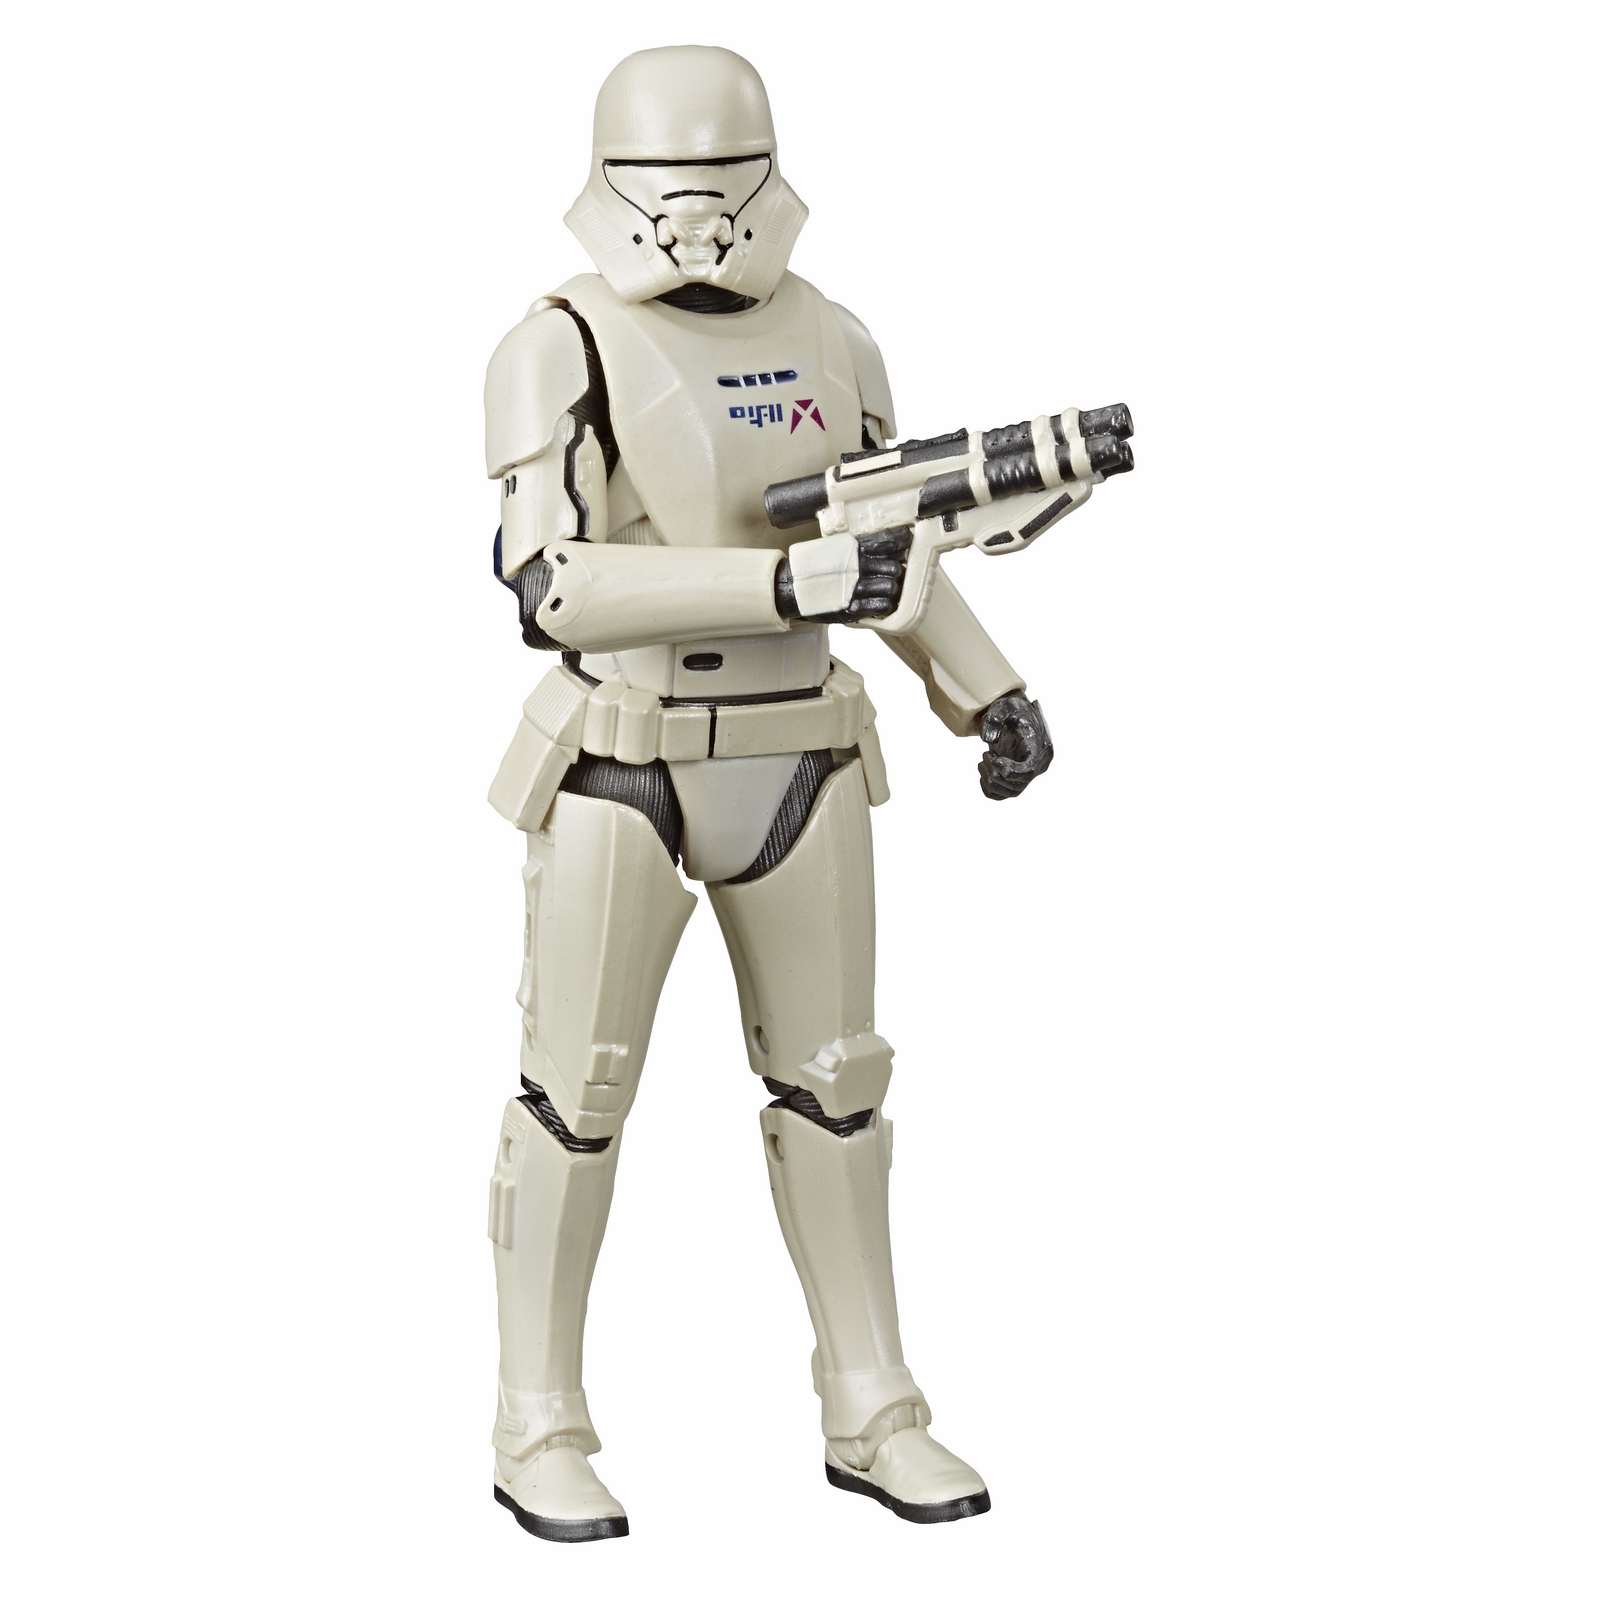 STAR WARS THE BLACK SERIES 6-INCH FIRST ORDER JET TROOPER CARBONIZED COLLECTION Figure - oop.jpg